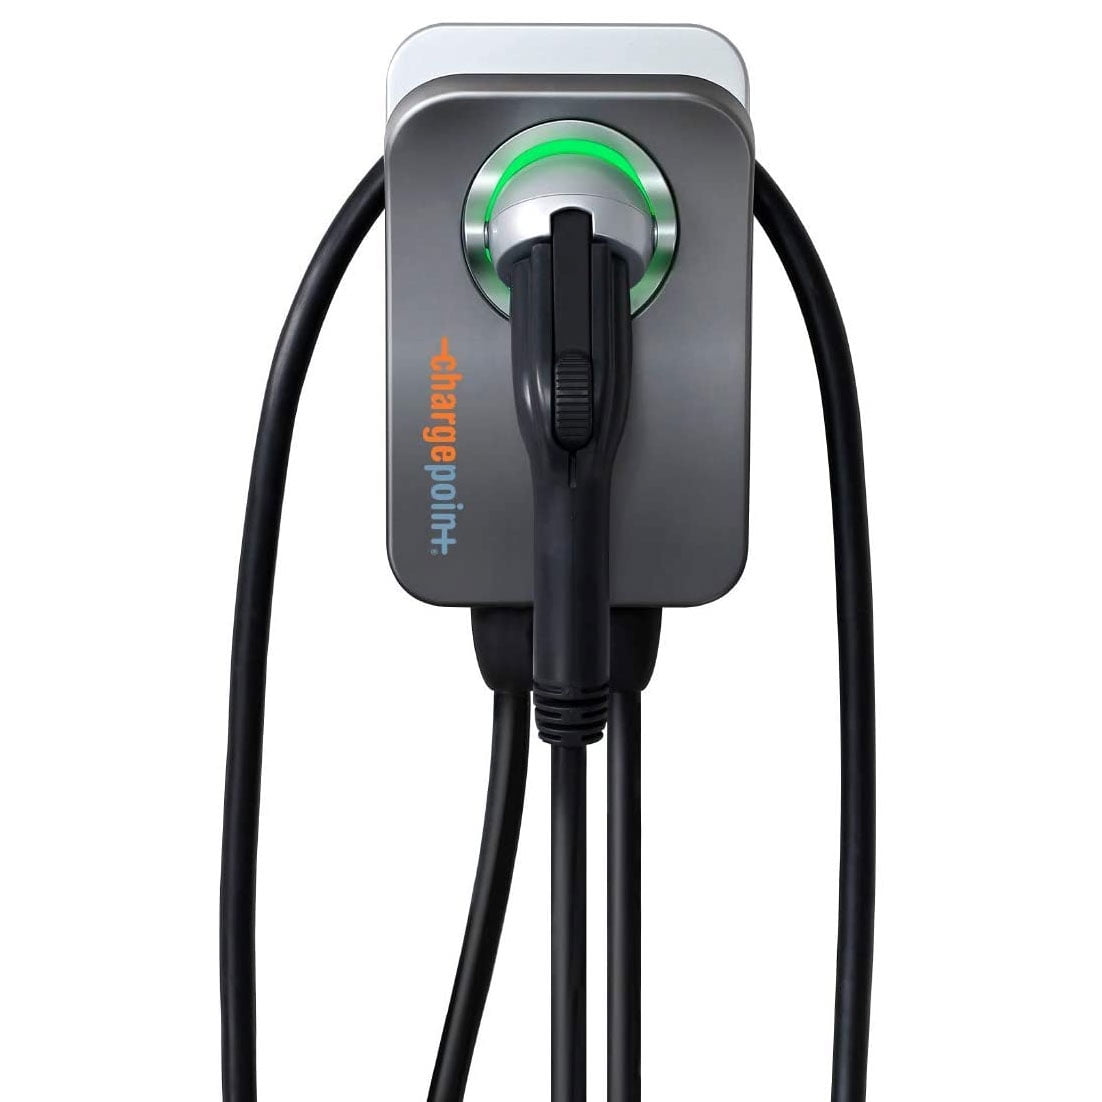 chargepoint-home-flex-electric-vehicle-ev-charger-16-to-50-amp-240v